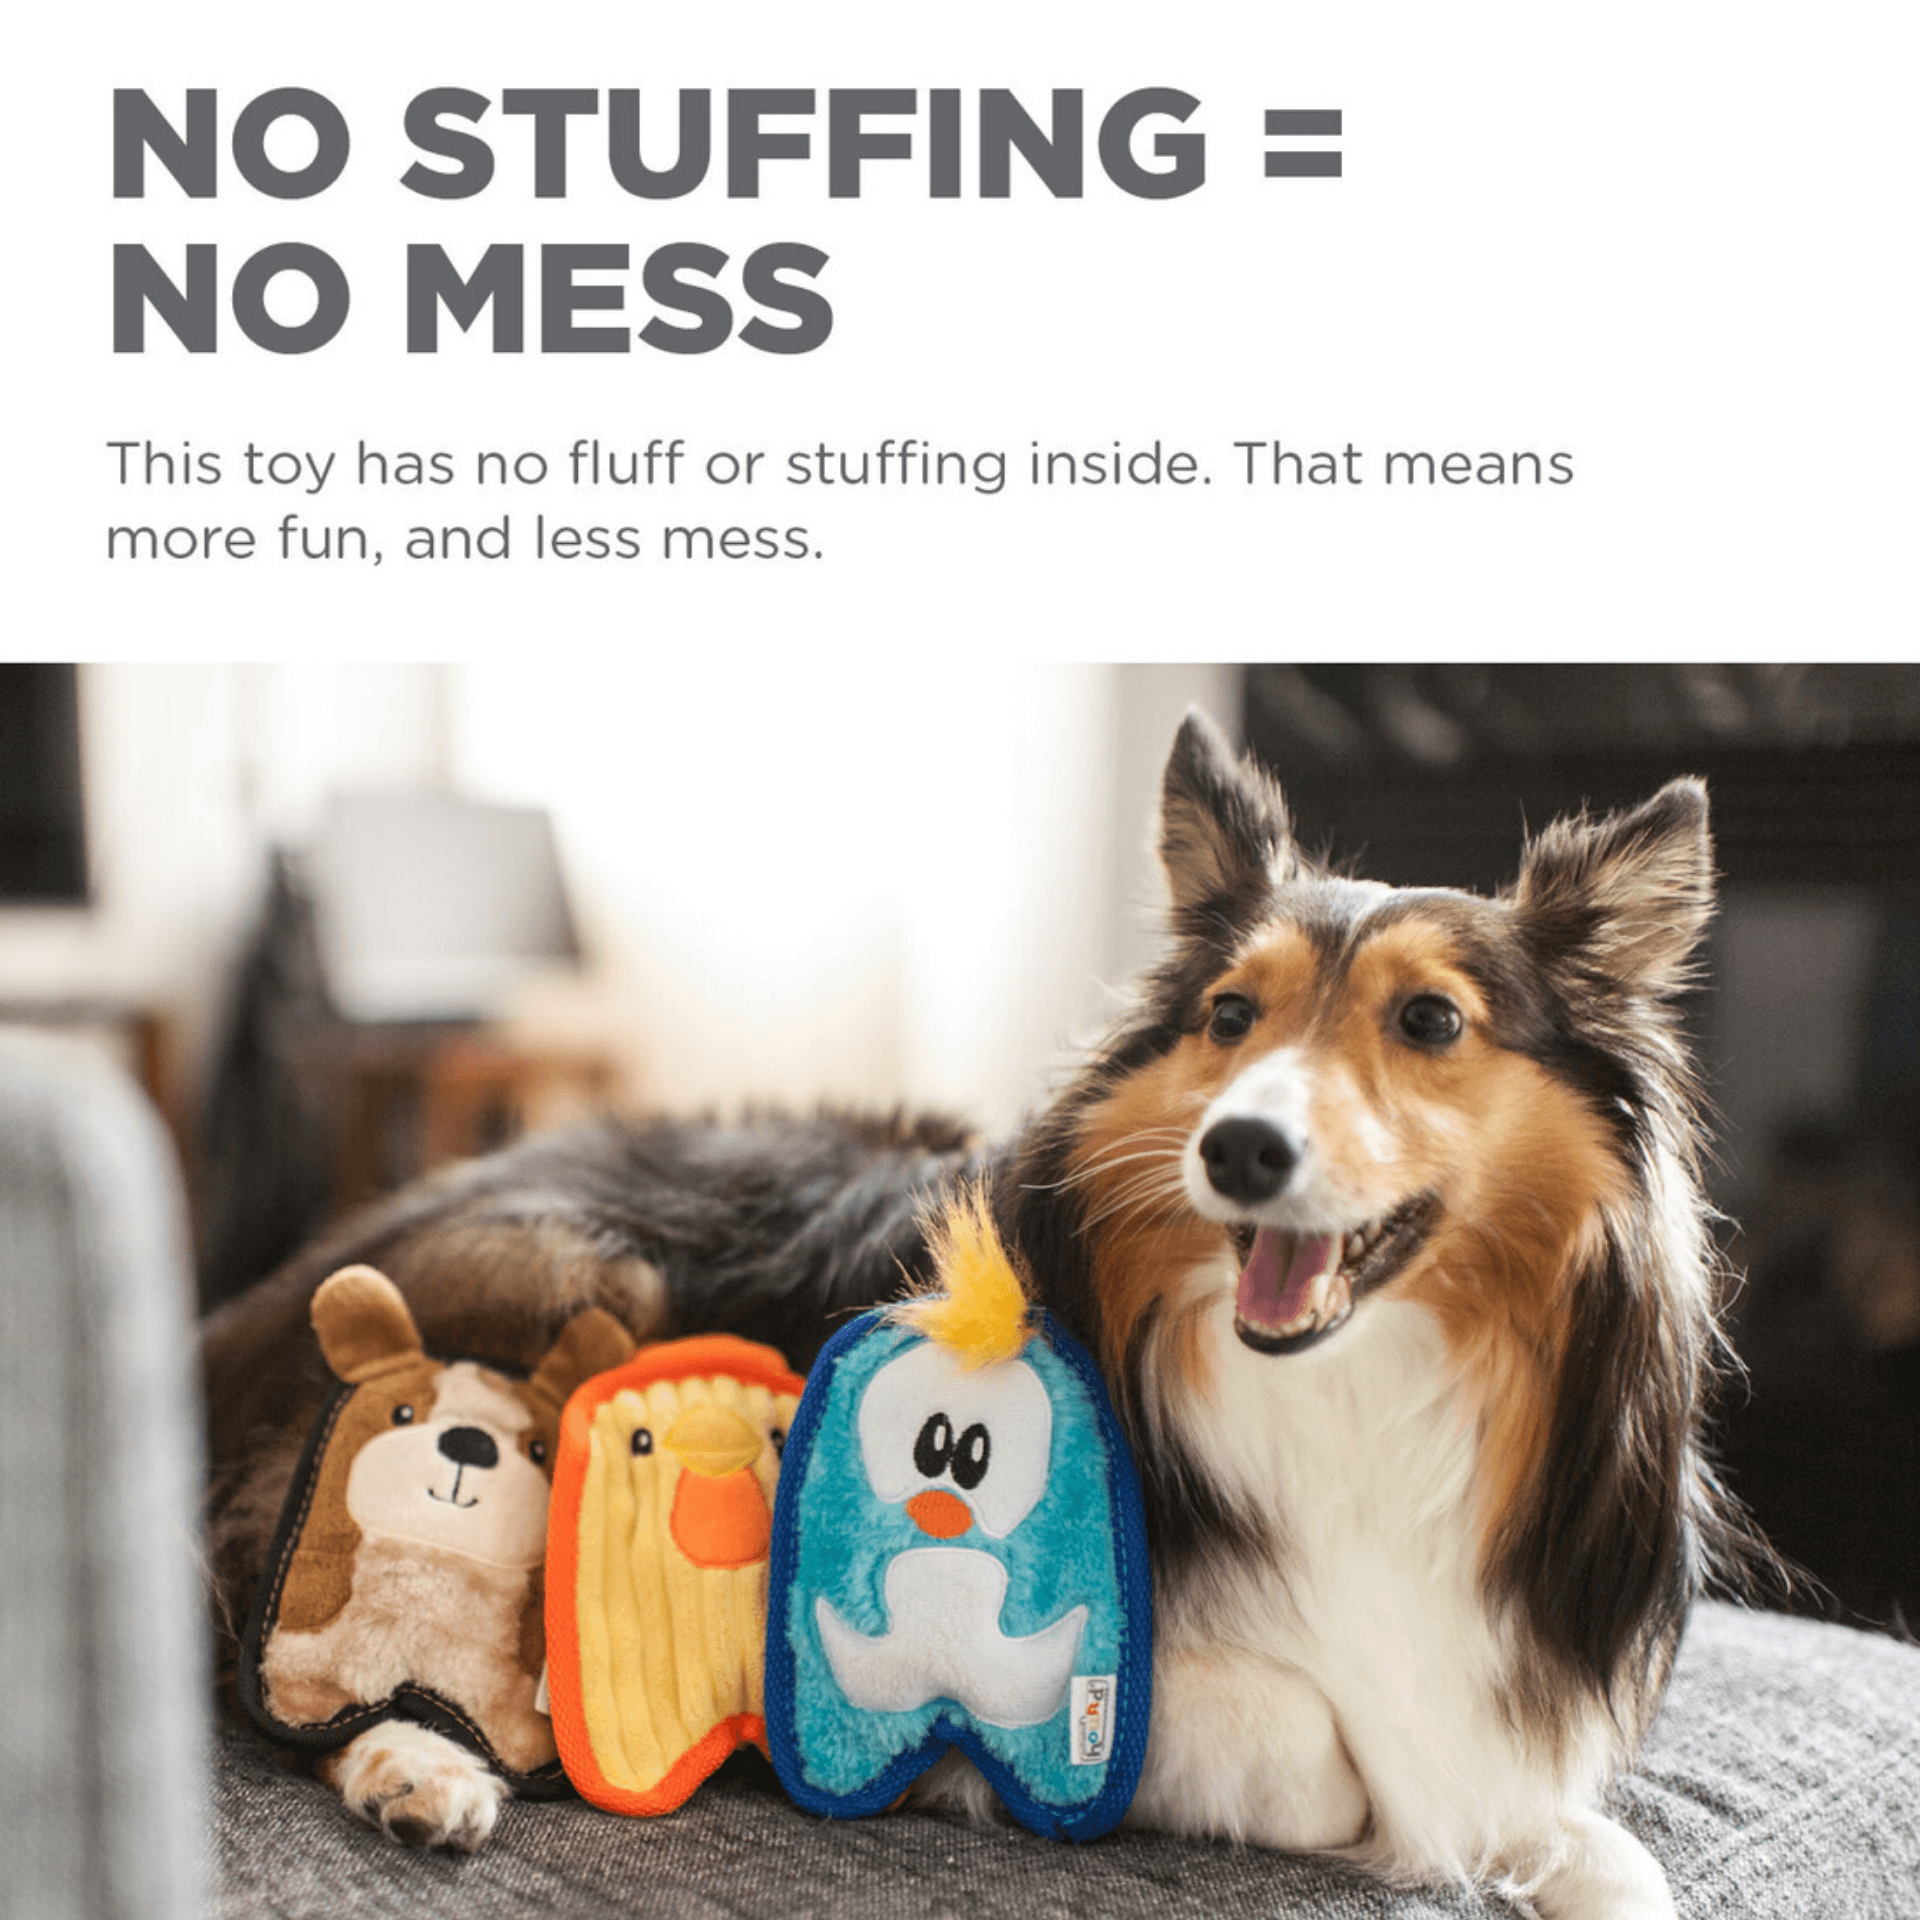 Penguin invincible and durable dog toy for ruffer play, let's pawty